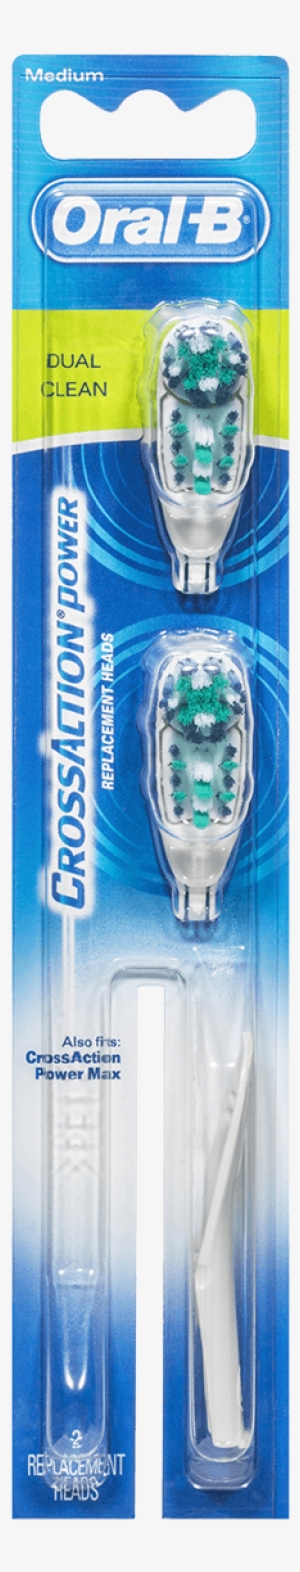 Oral-b Crossaction Power Dual Clean Brush Head - Oral B Toothbrush Cross Action